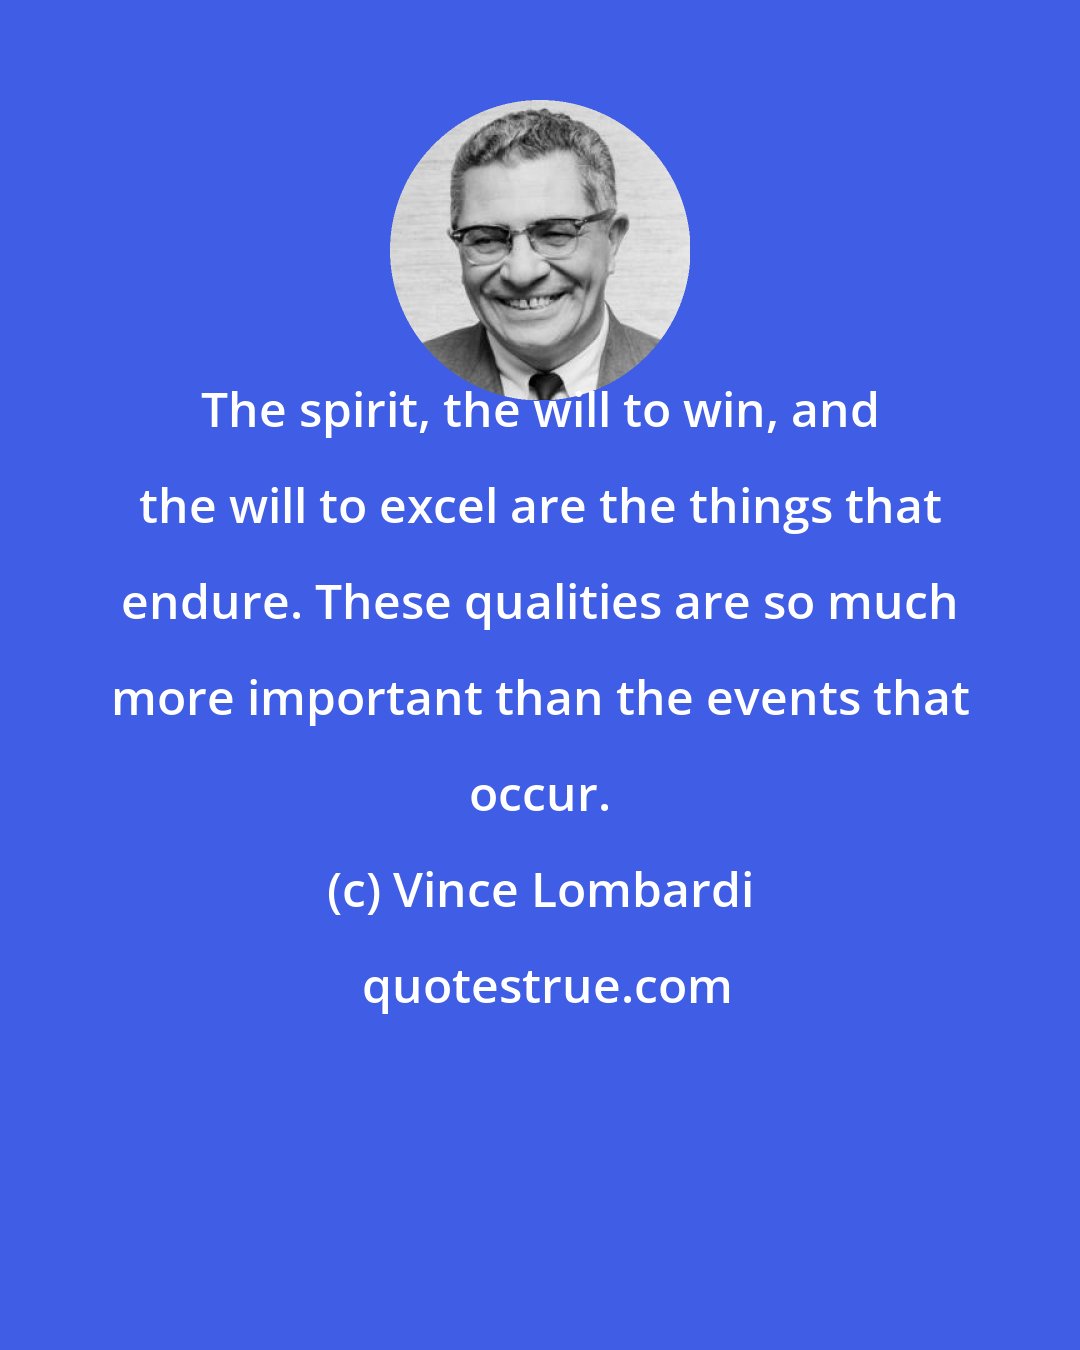 Vince Lombardi: The spirit, the will to win, and the will to excel are the things that endure. These qualities are so much more important than the events that occur.